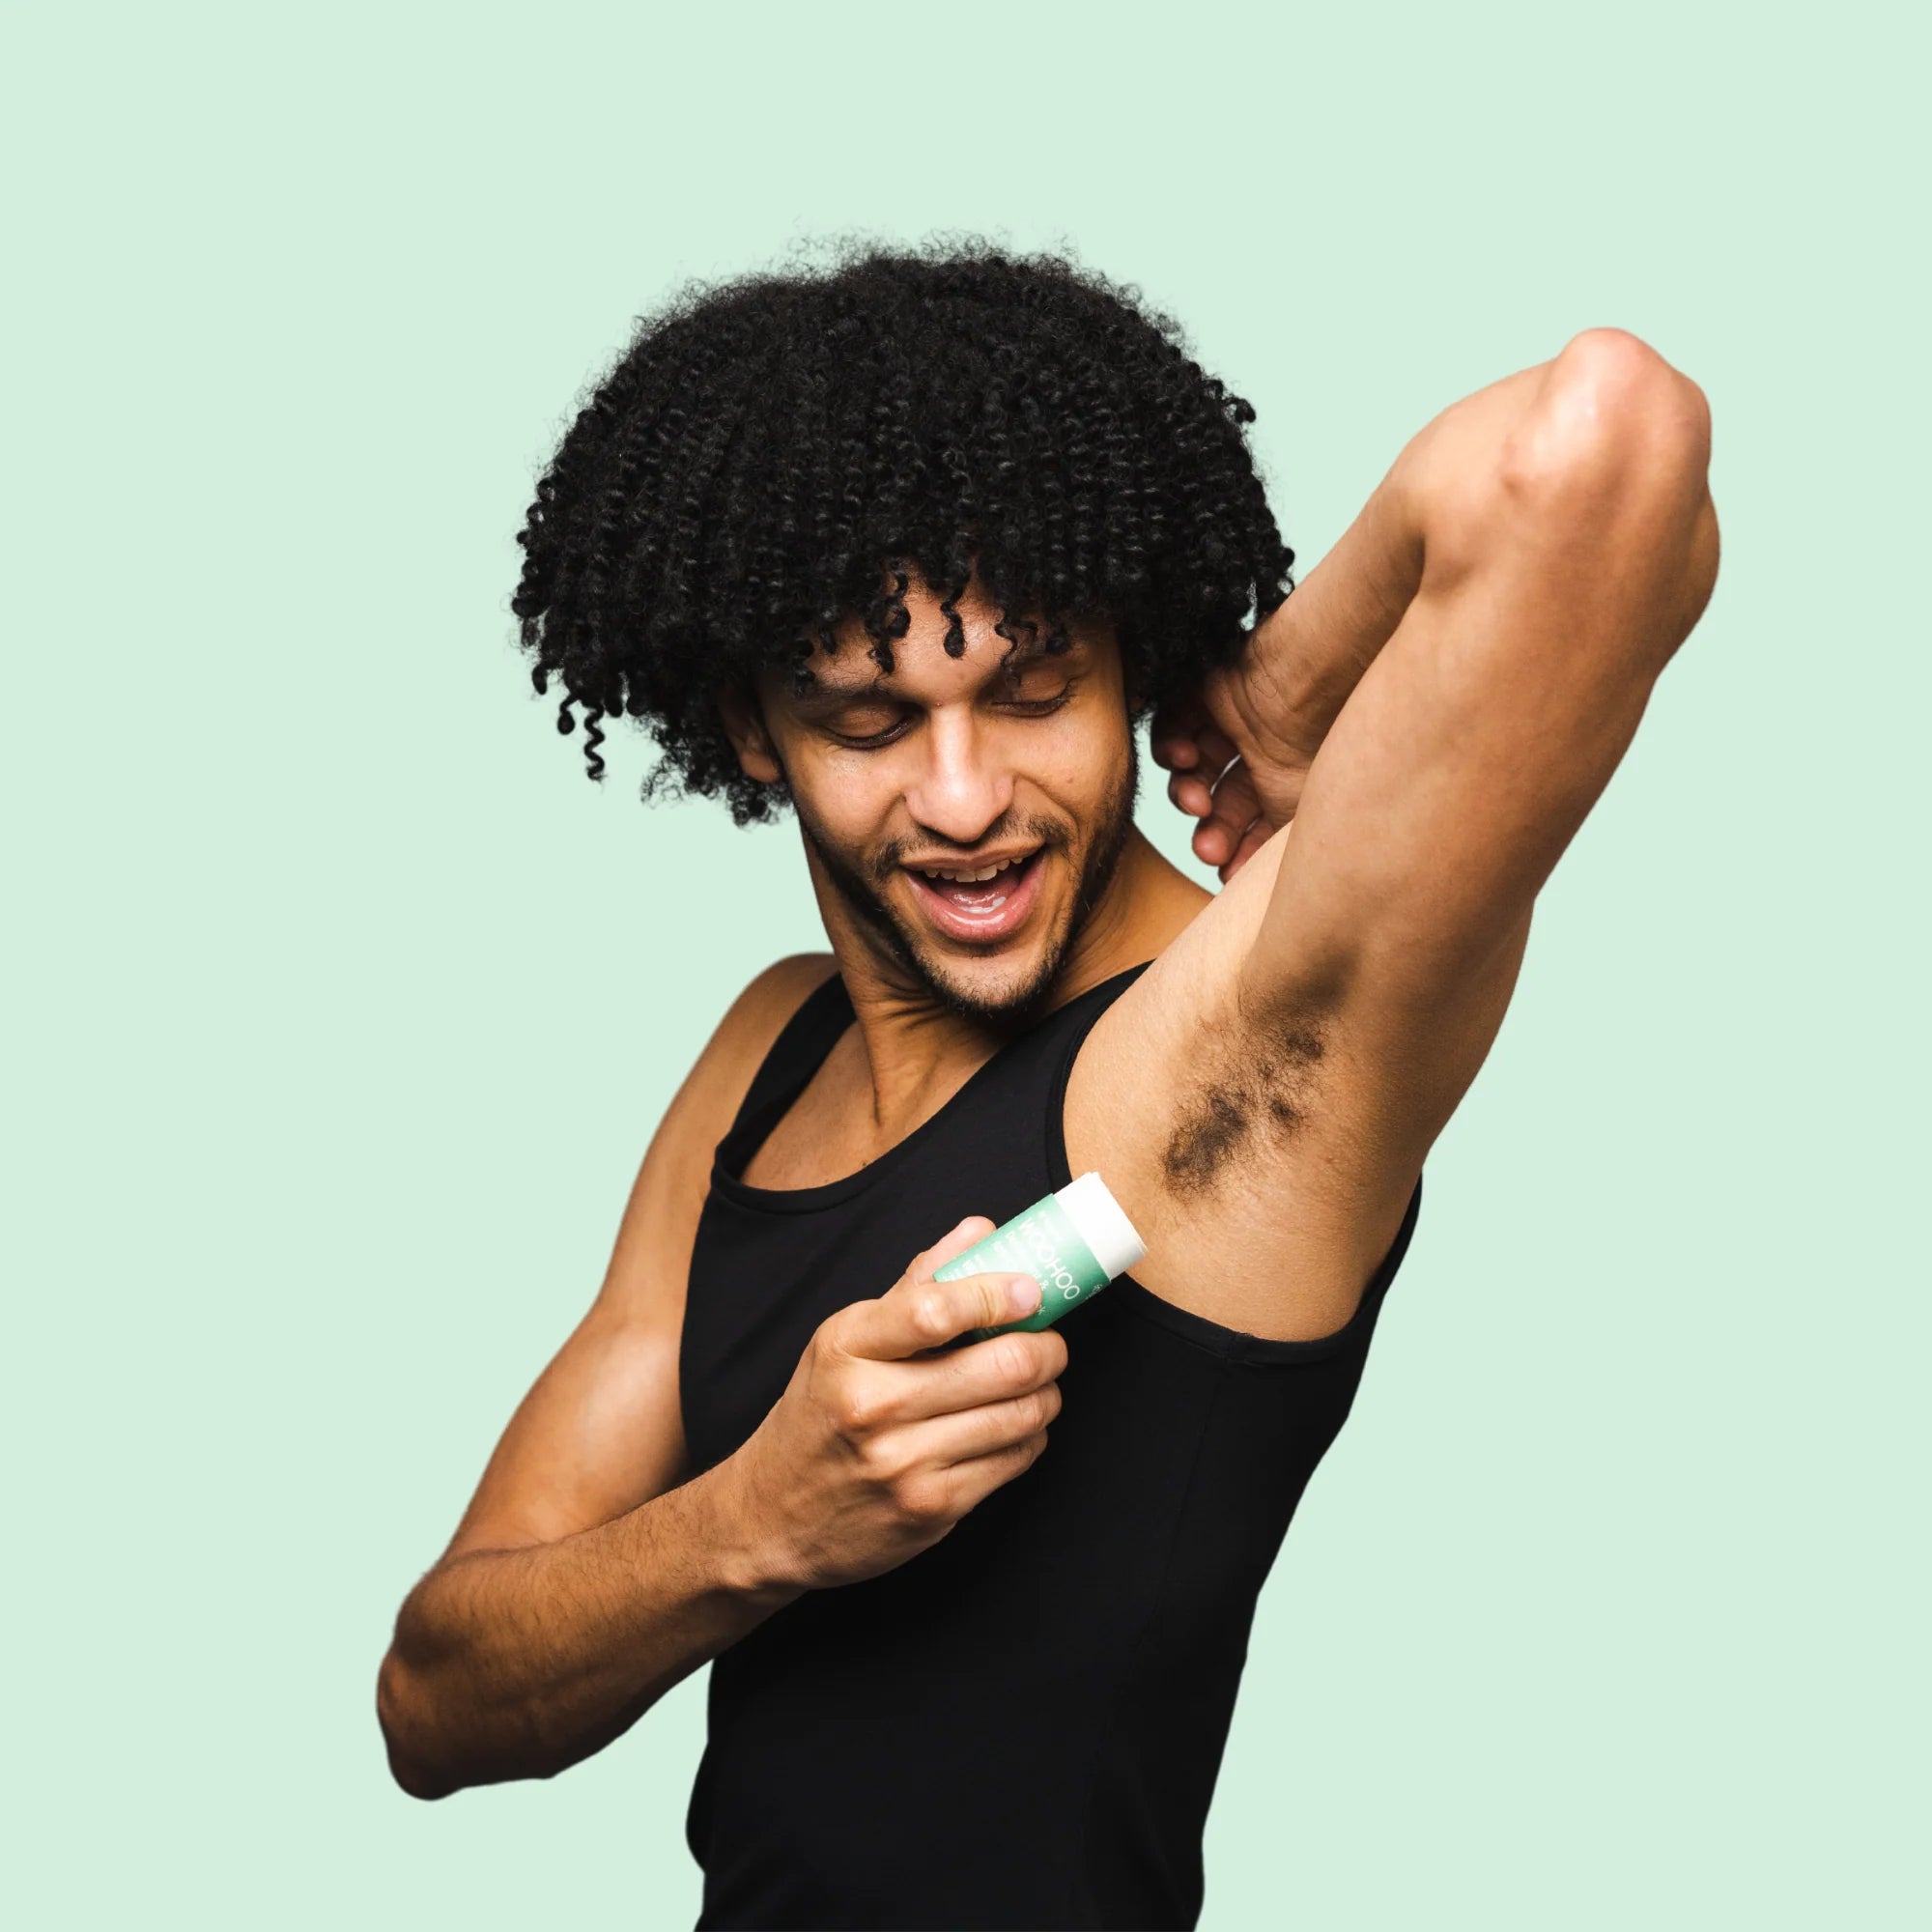 Image of a guy in a black sleeveless shirt holding his arm up as he is about to apply an opened Wild Natural Deodorant Stick with his other hand in front of a light green background